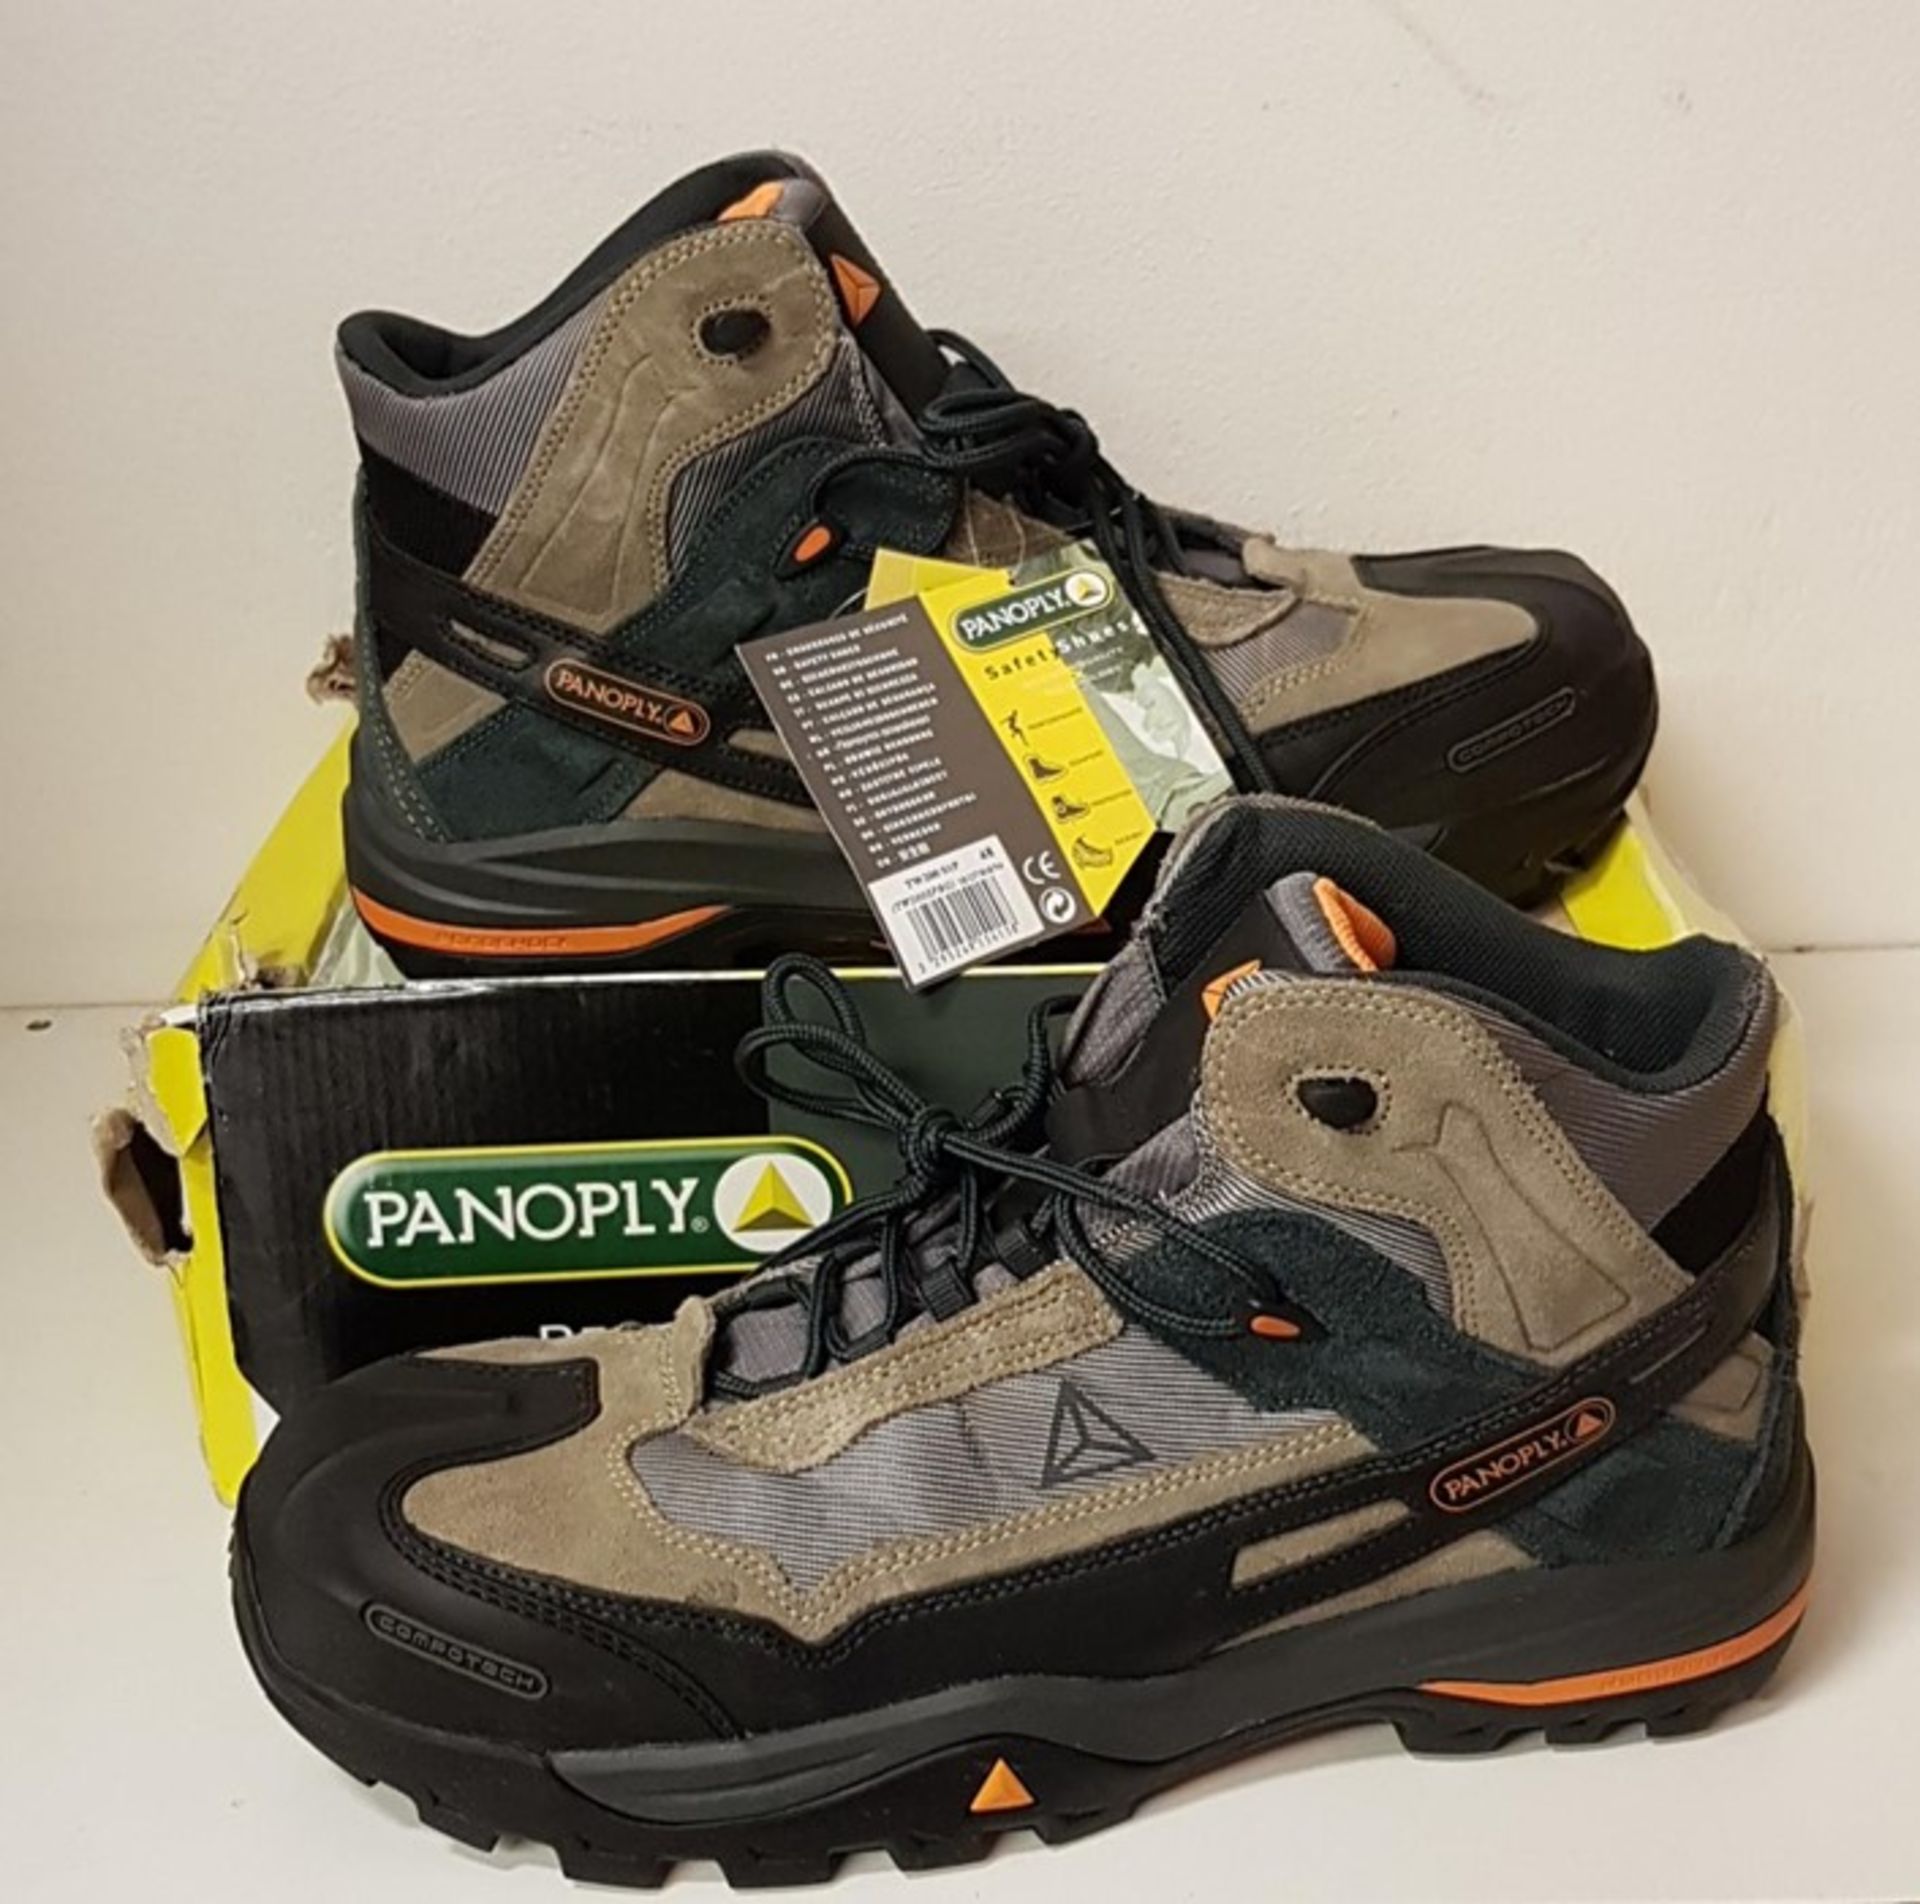 1 BOXED PANOPLY SAFETY BOOTS IN BEIGE/GREY, SIZE 13 (VIEWING HIGHLY RECOMMENDED)